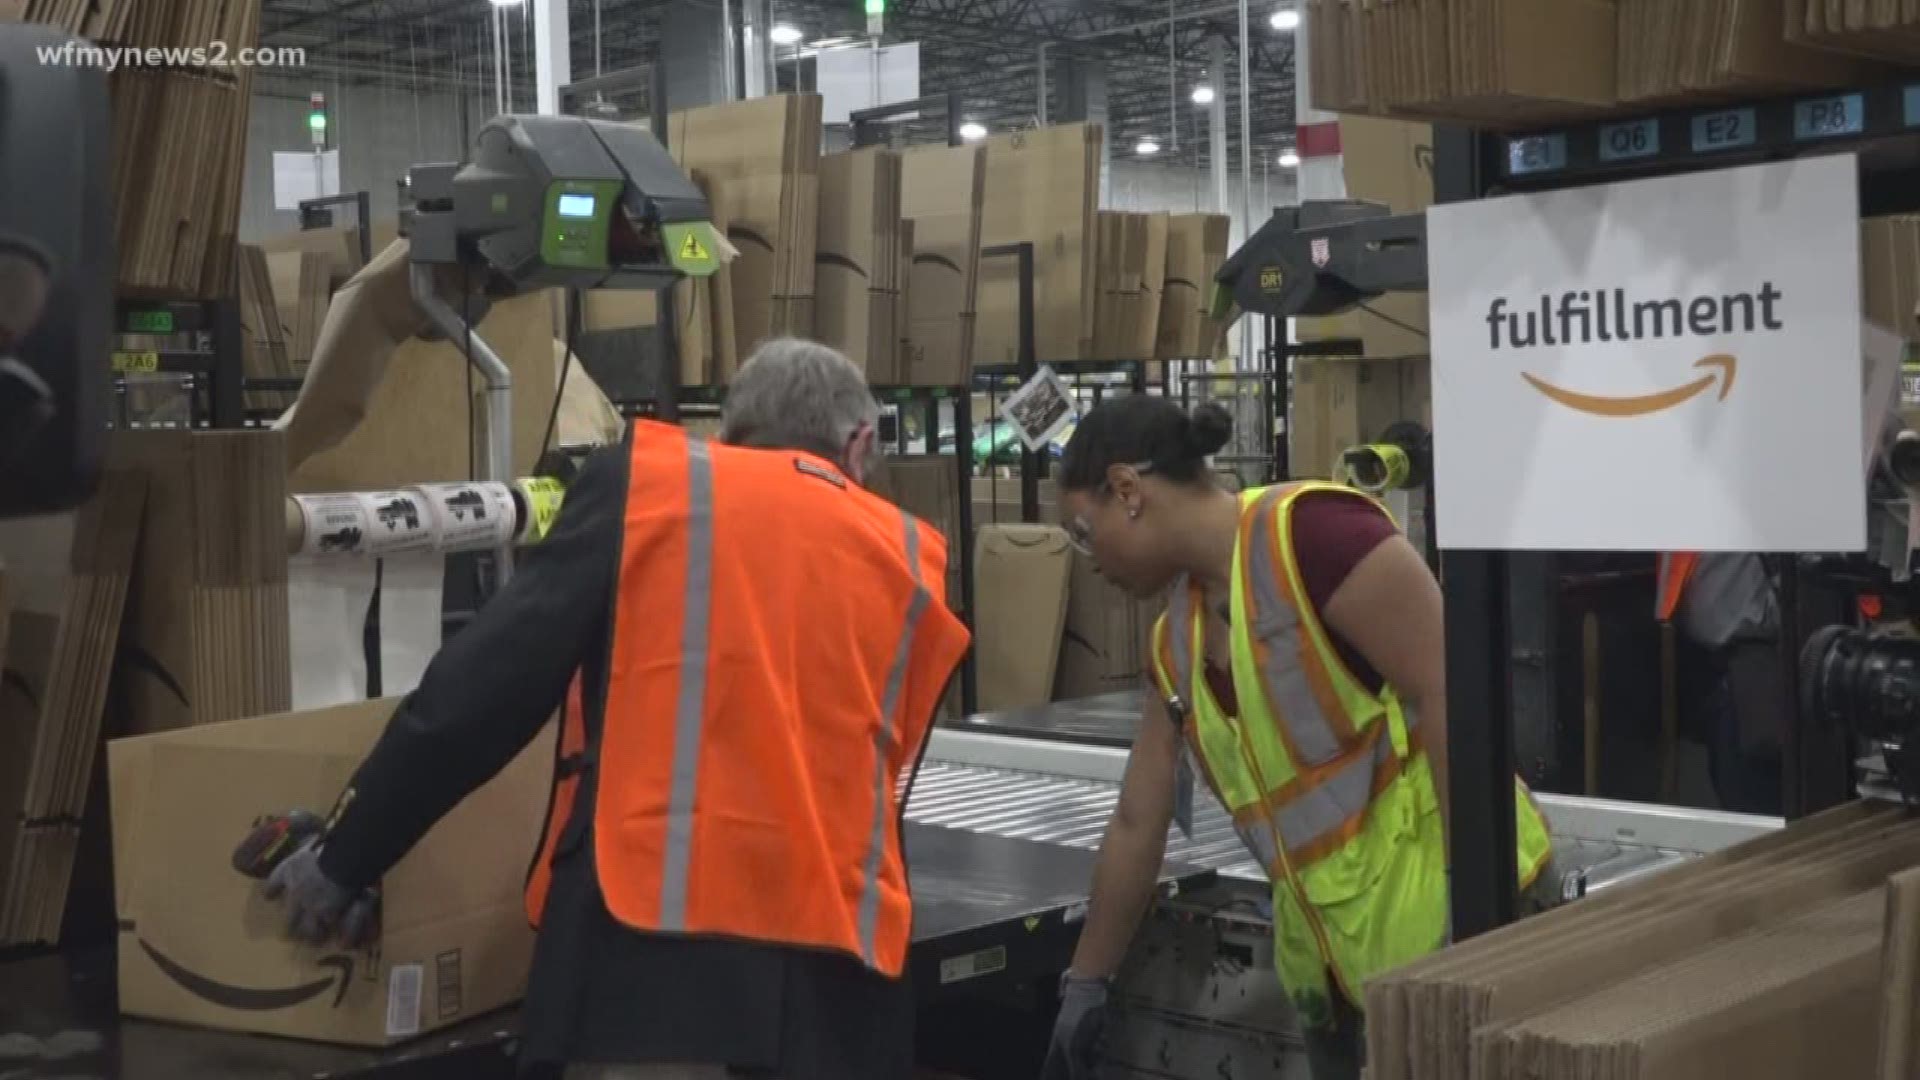 Charlotte, Garner, Kannapolis,  and Kernersville.
Places in North Carolina where Amazon has already set up shop or working on doing so.
These fulfillment centers are breathing life to those communities.